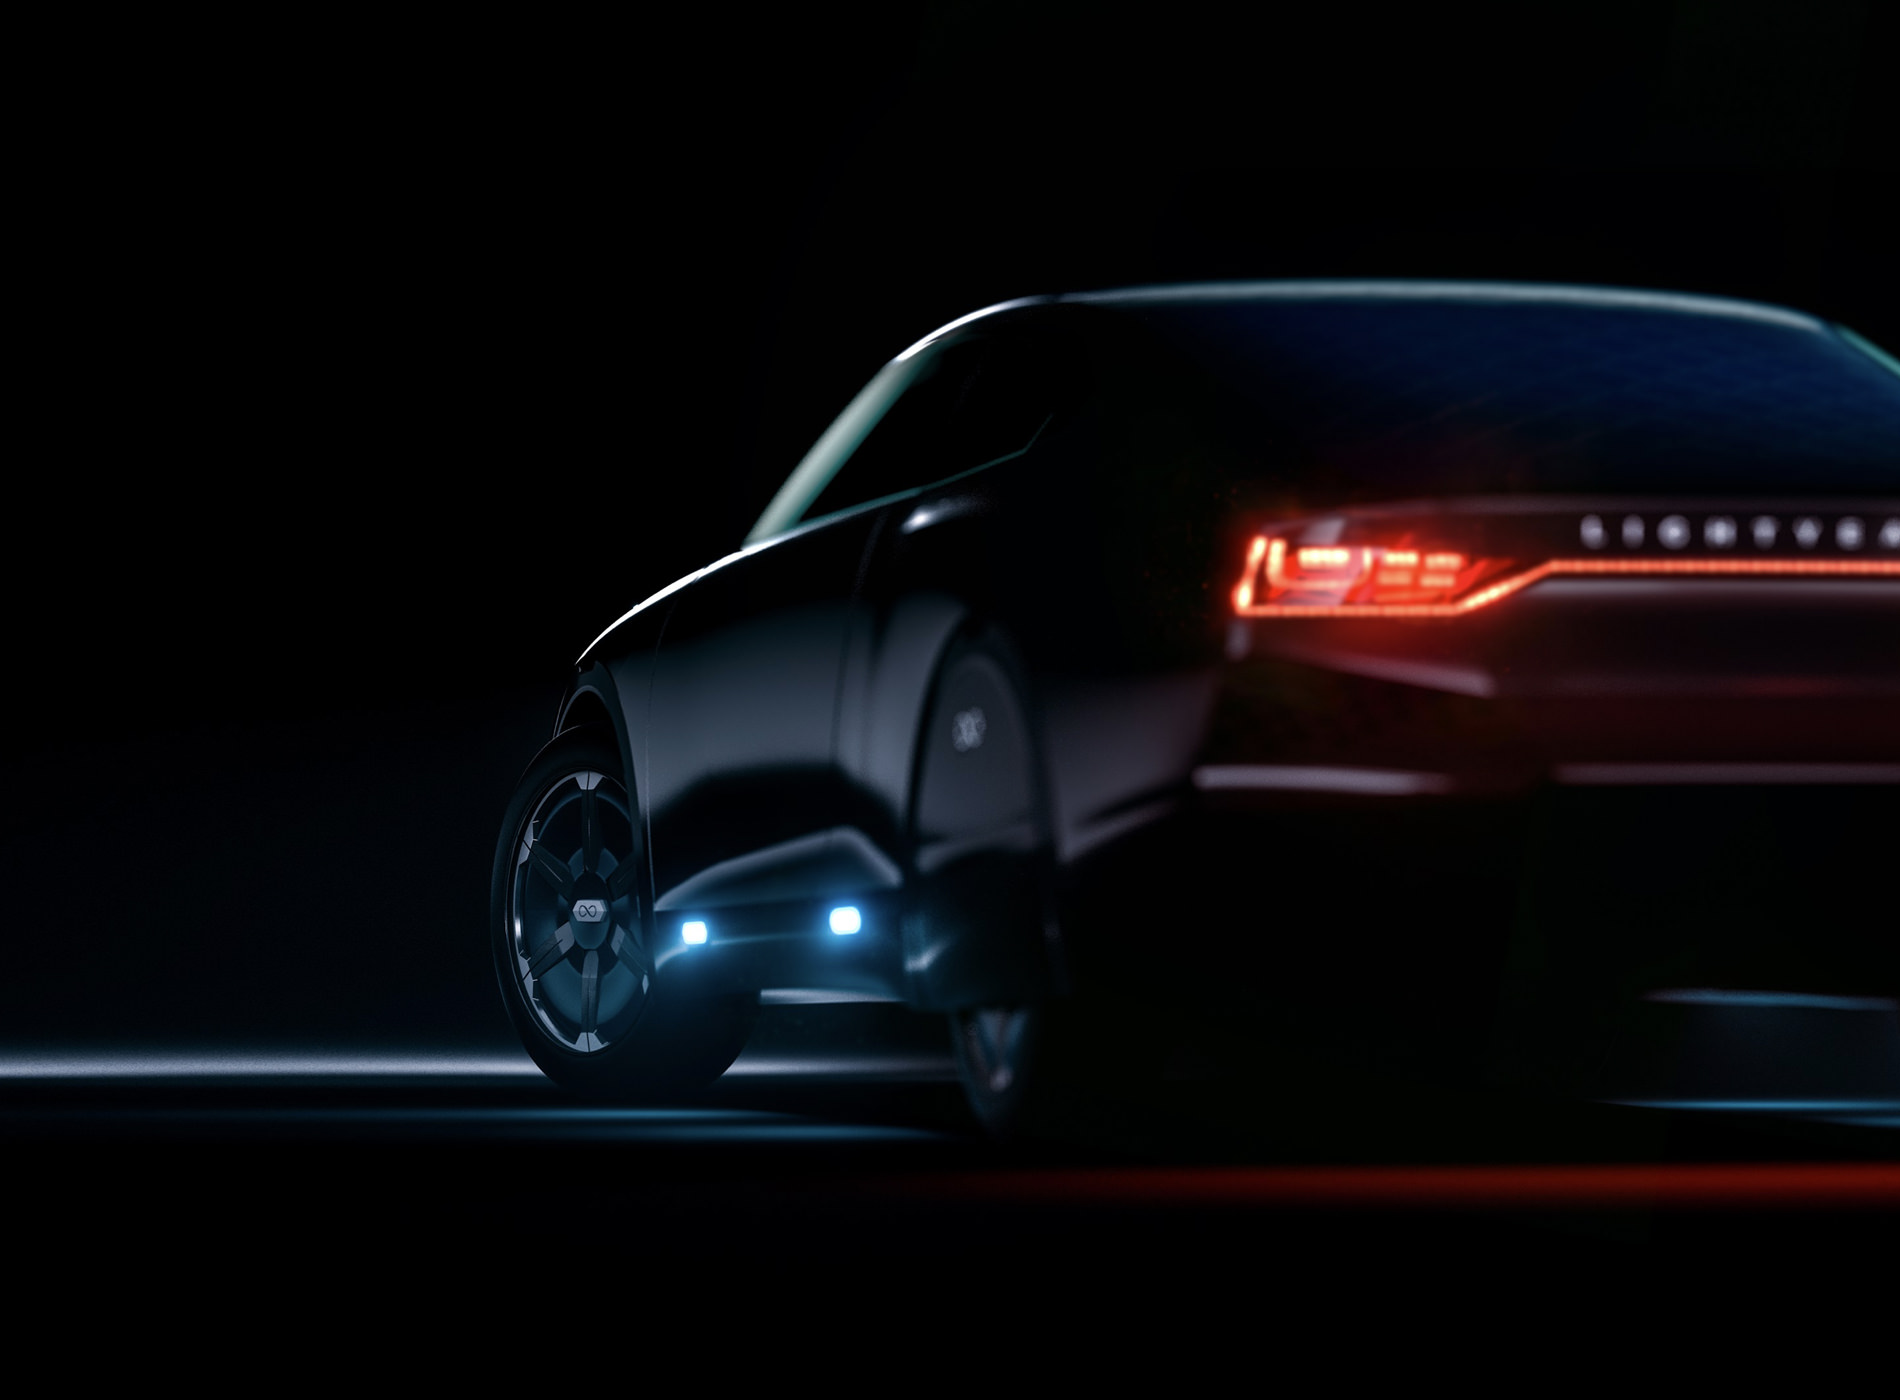 Lightyear One Voiture Electrique Chargement Solaire Teaser